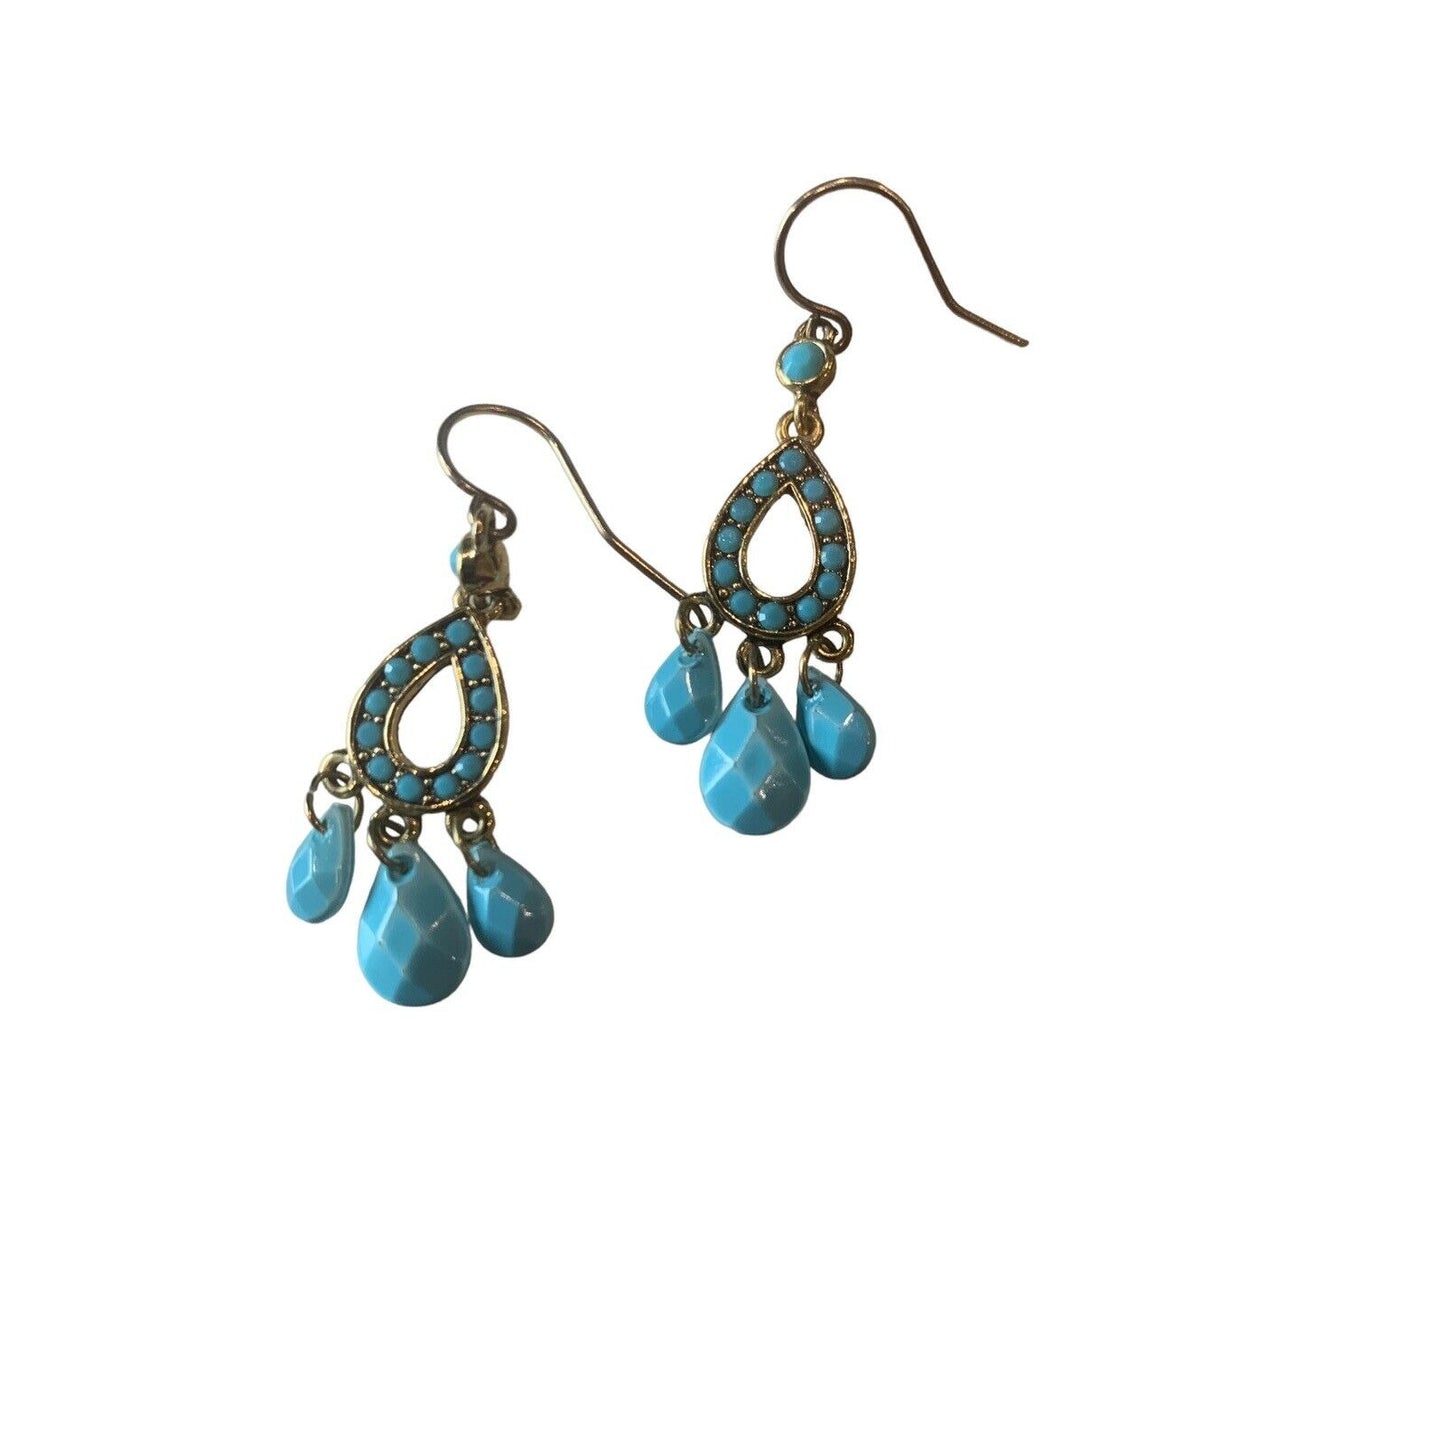 Monet Miniature Gold-Tone Chandelier Earrings With Turquoise Blue Stones